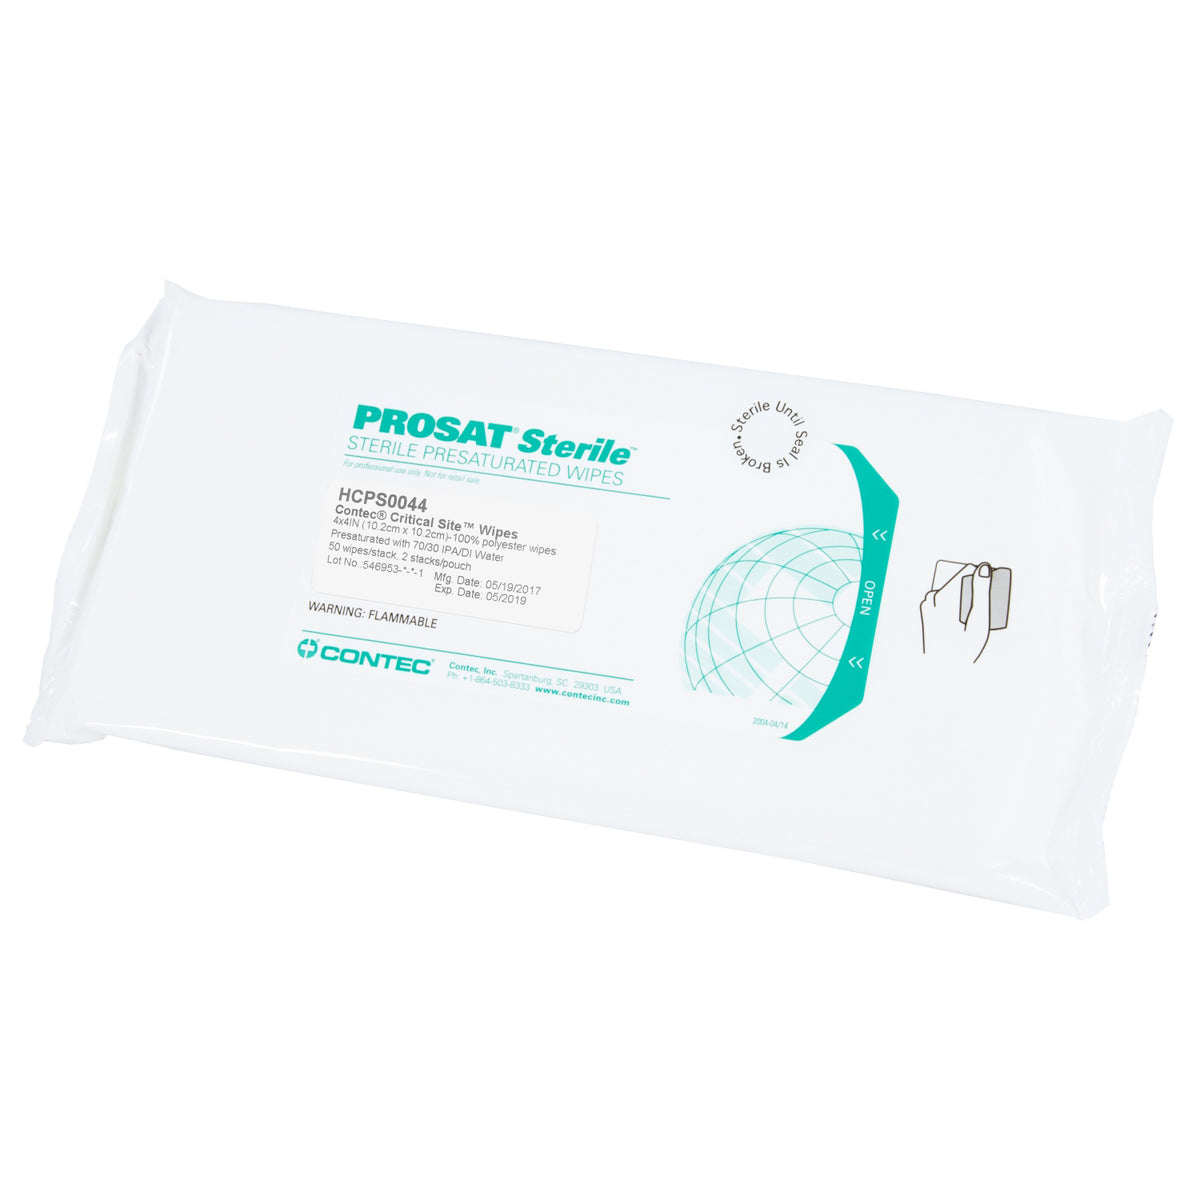 Reinraum-Tuch PROSAT Vial Wipes | steril, ISO 5, Polyester, 10 x 10 cm